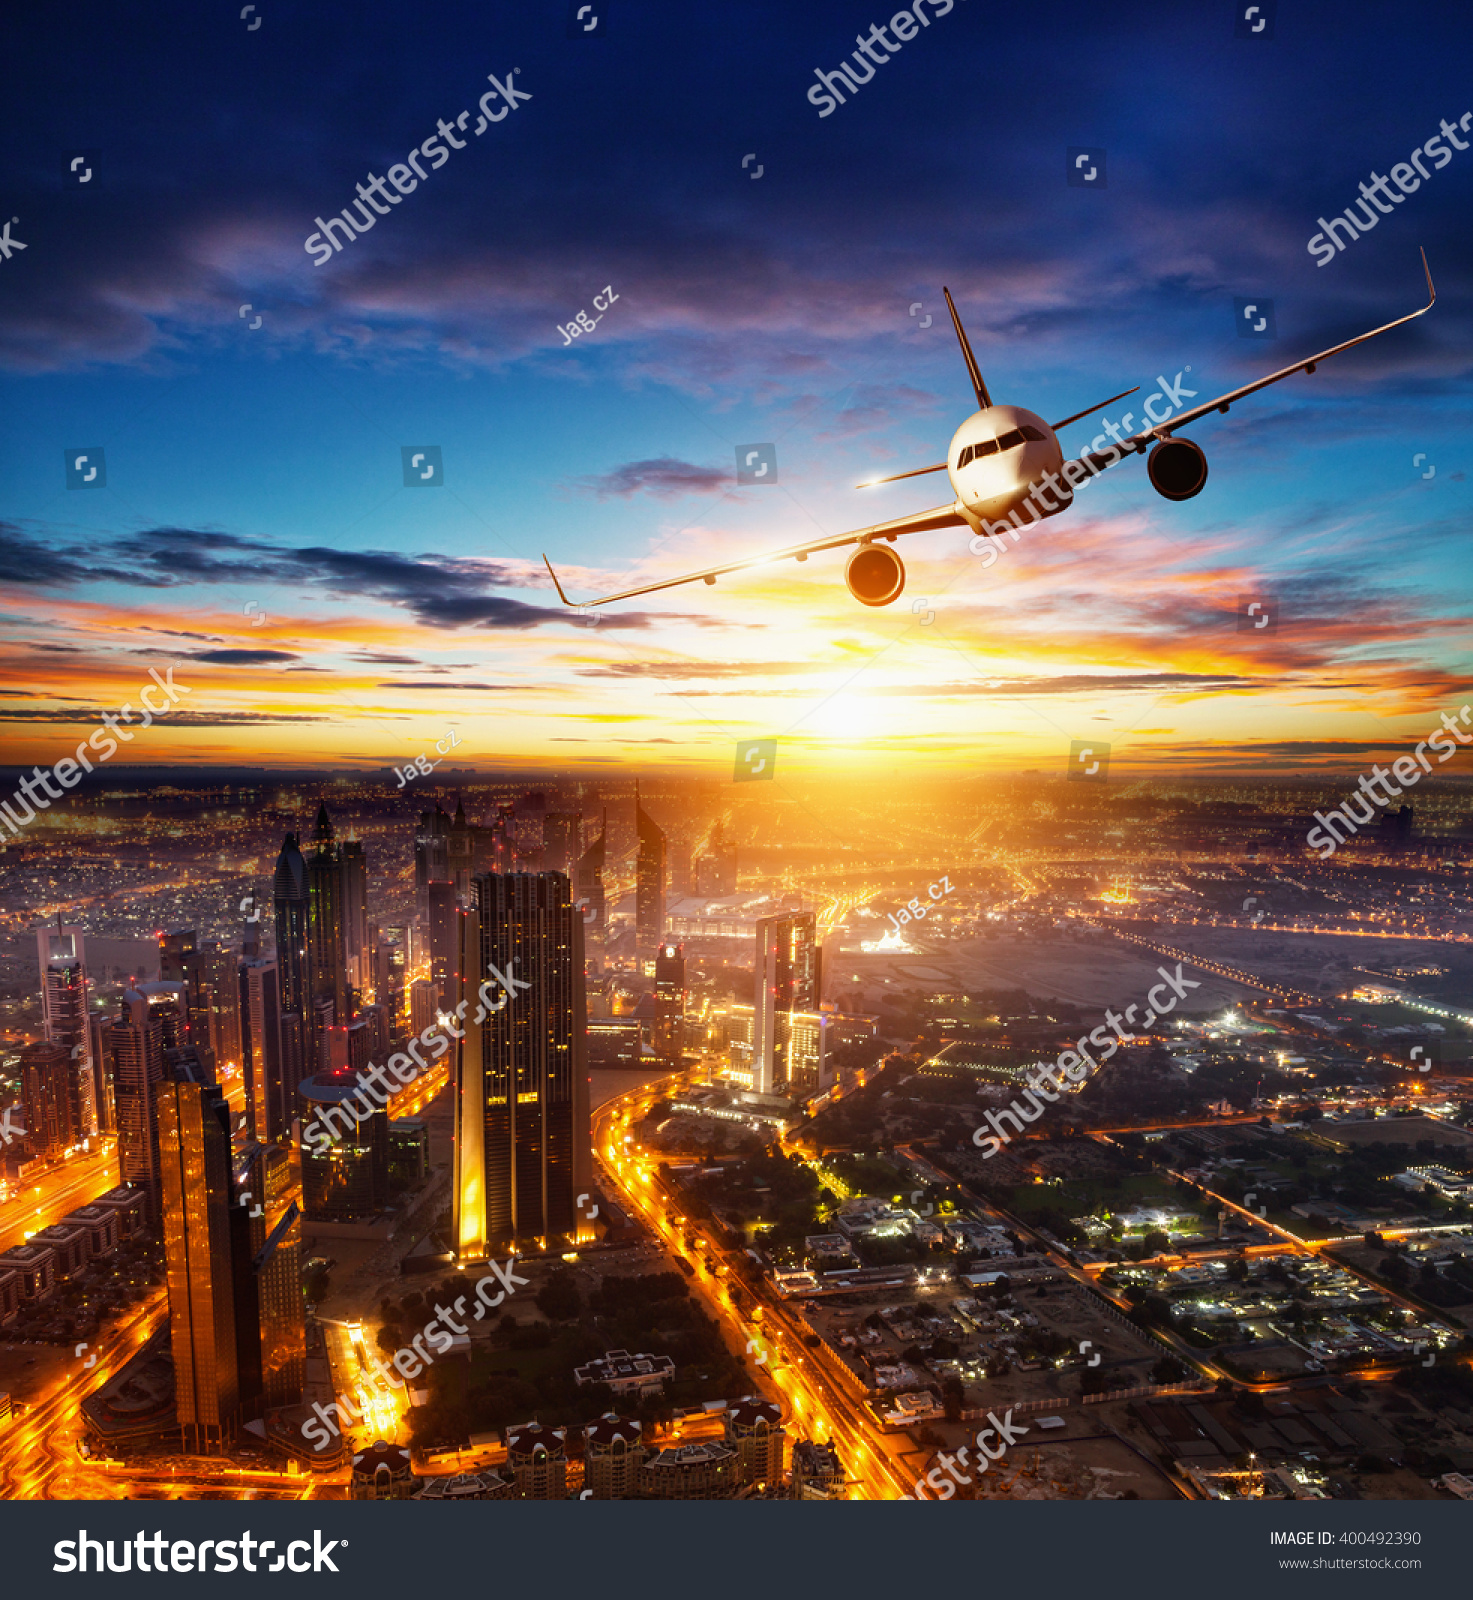 Commercial Airplane Flying Over Modern City Stock Photo 400492390 ...